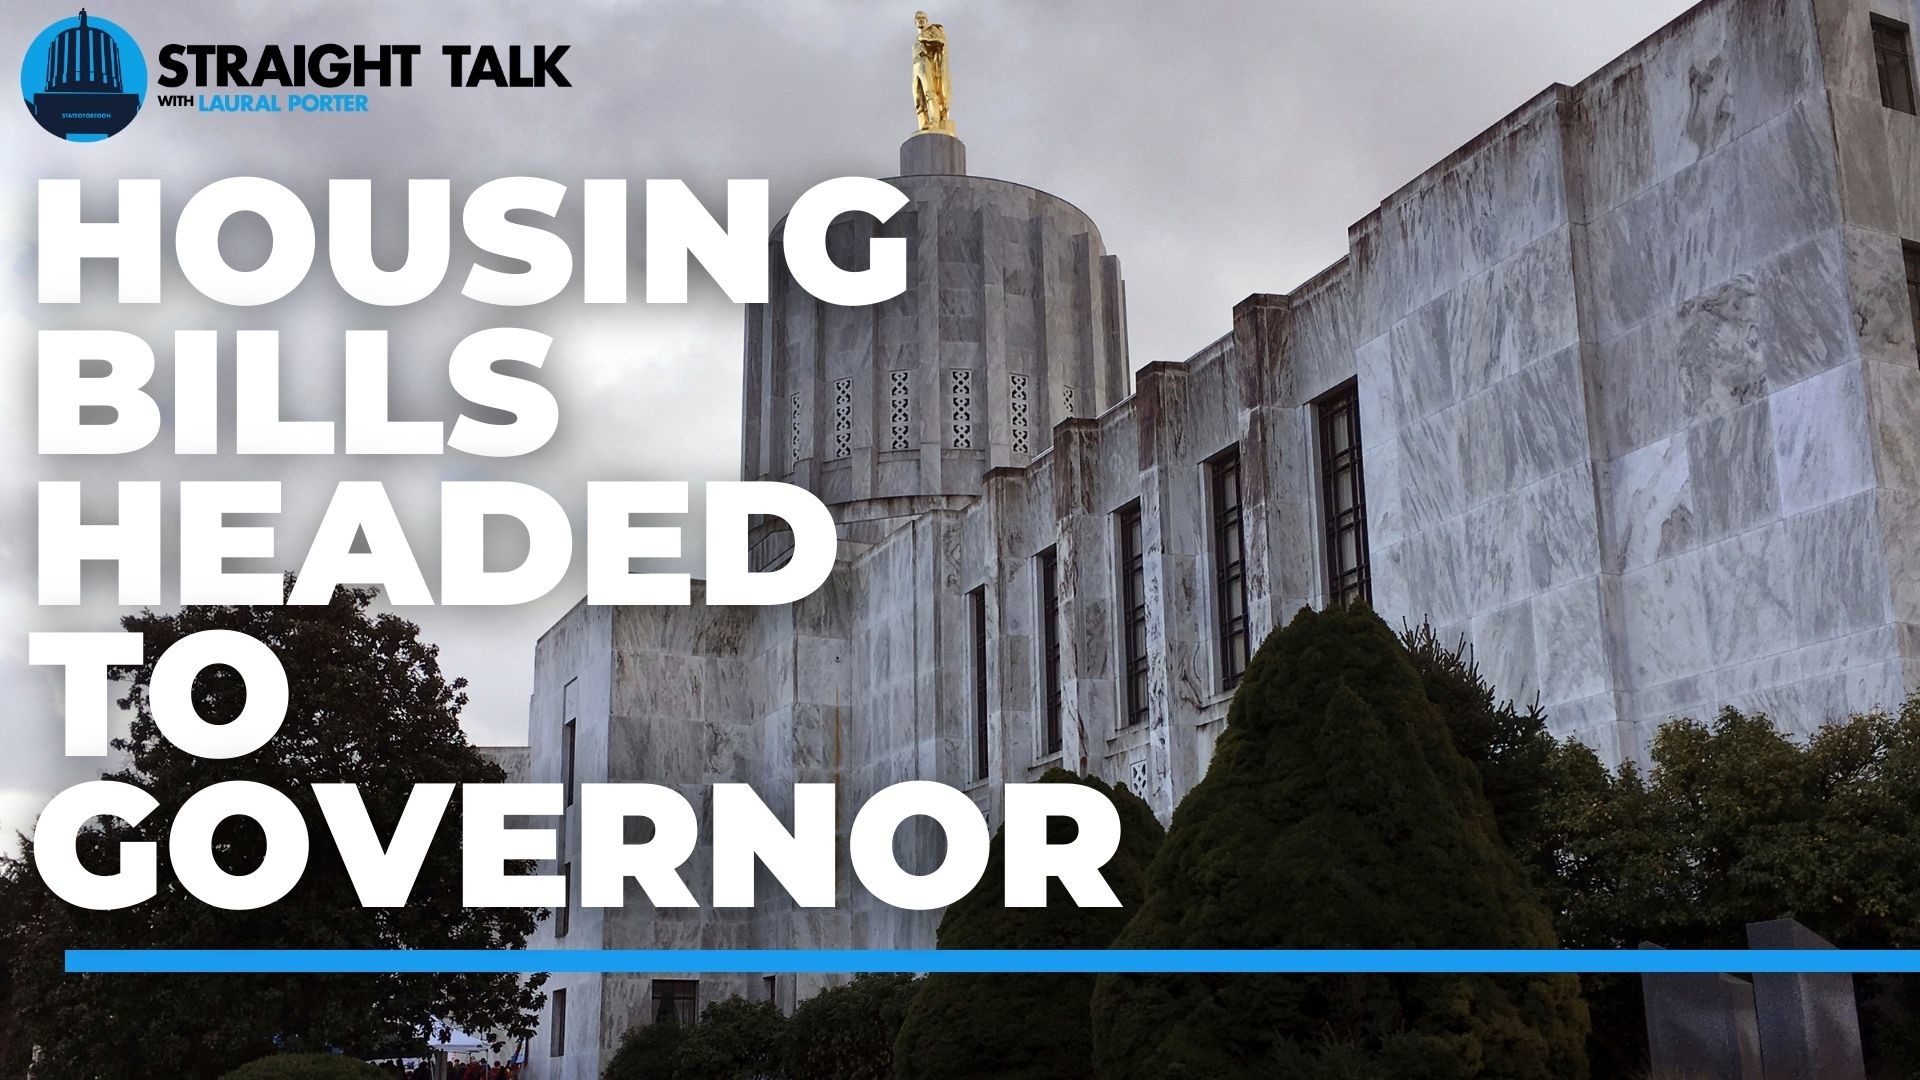 Oregon lawmakers passed $200 million funding package to address homelessness and affordable housing. The two bills now go to Oregon governor Tina Kotek.